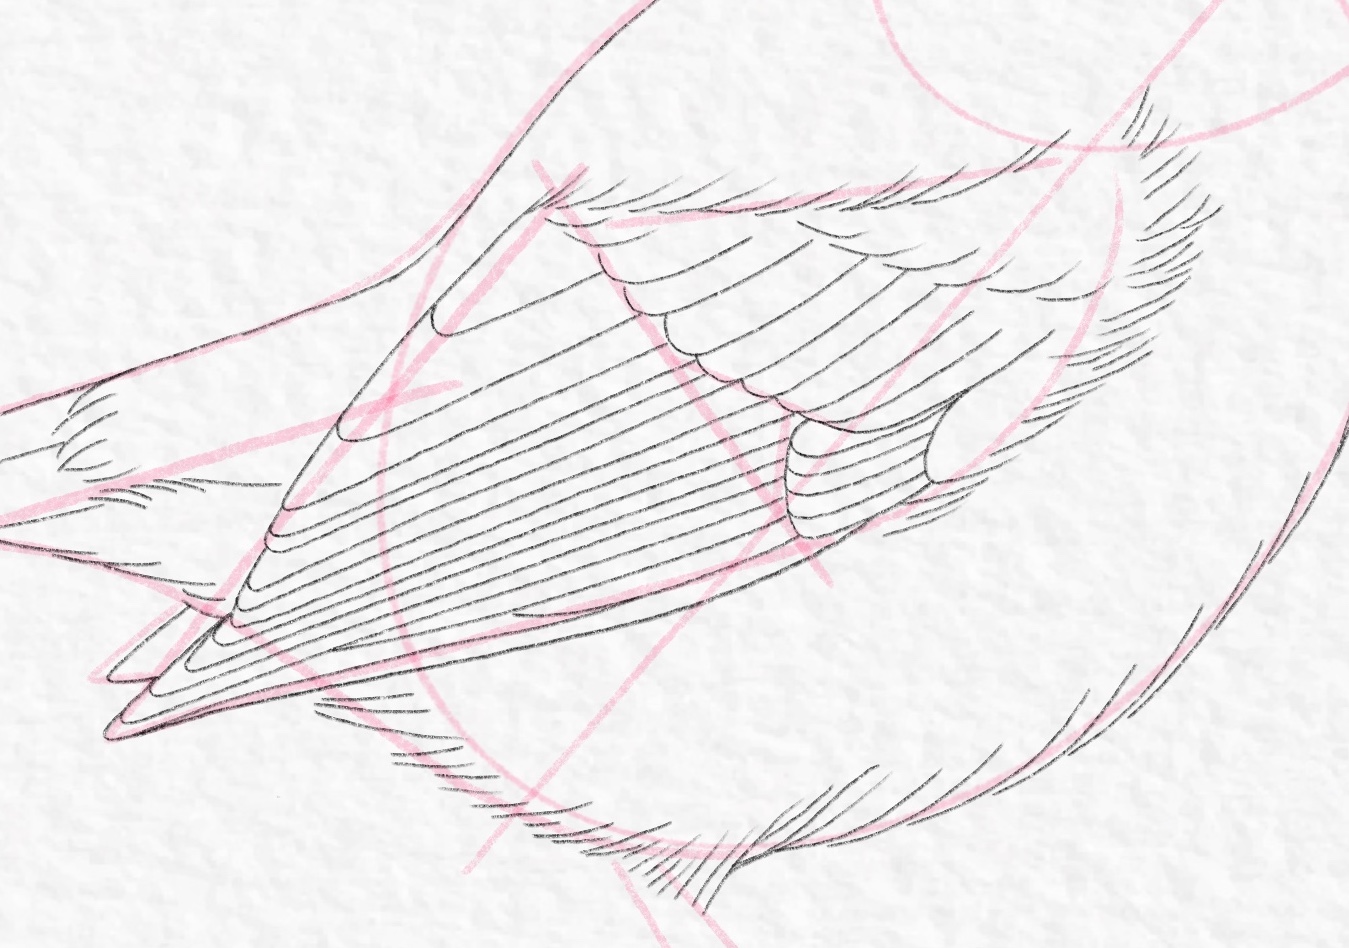 How to draw a bird - Step 15 cropped